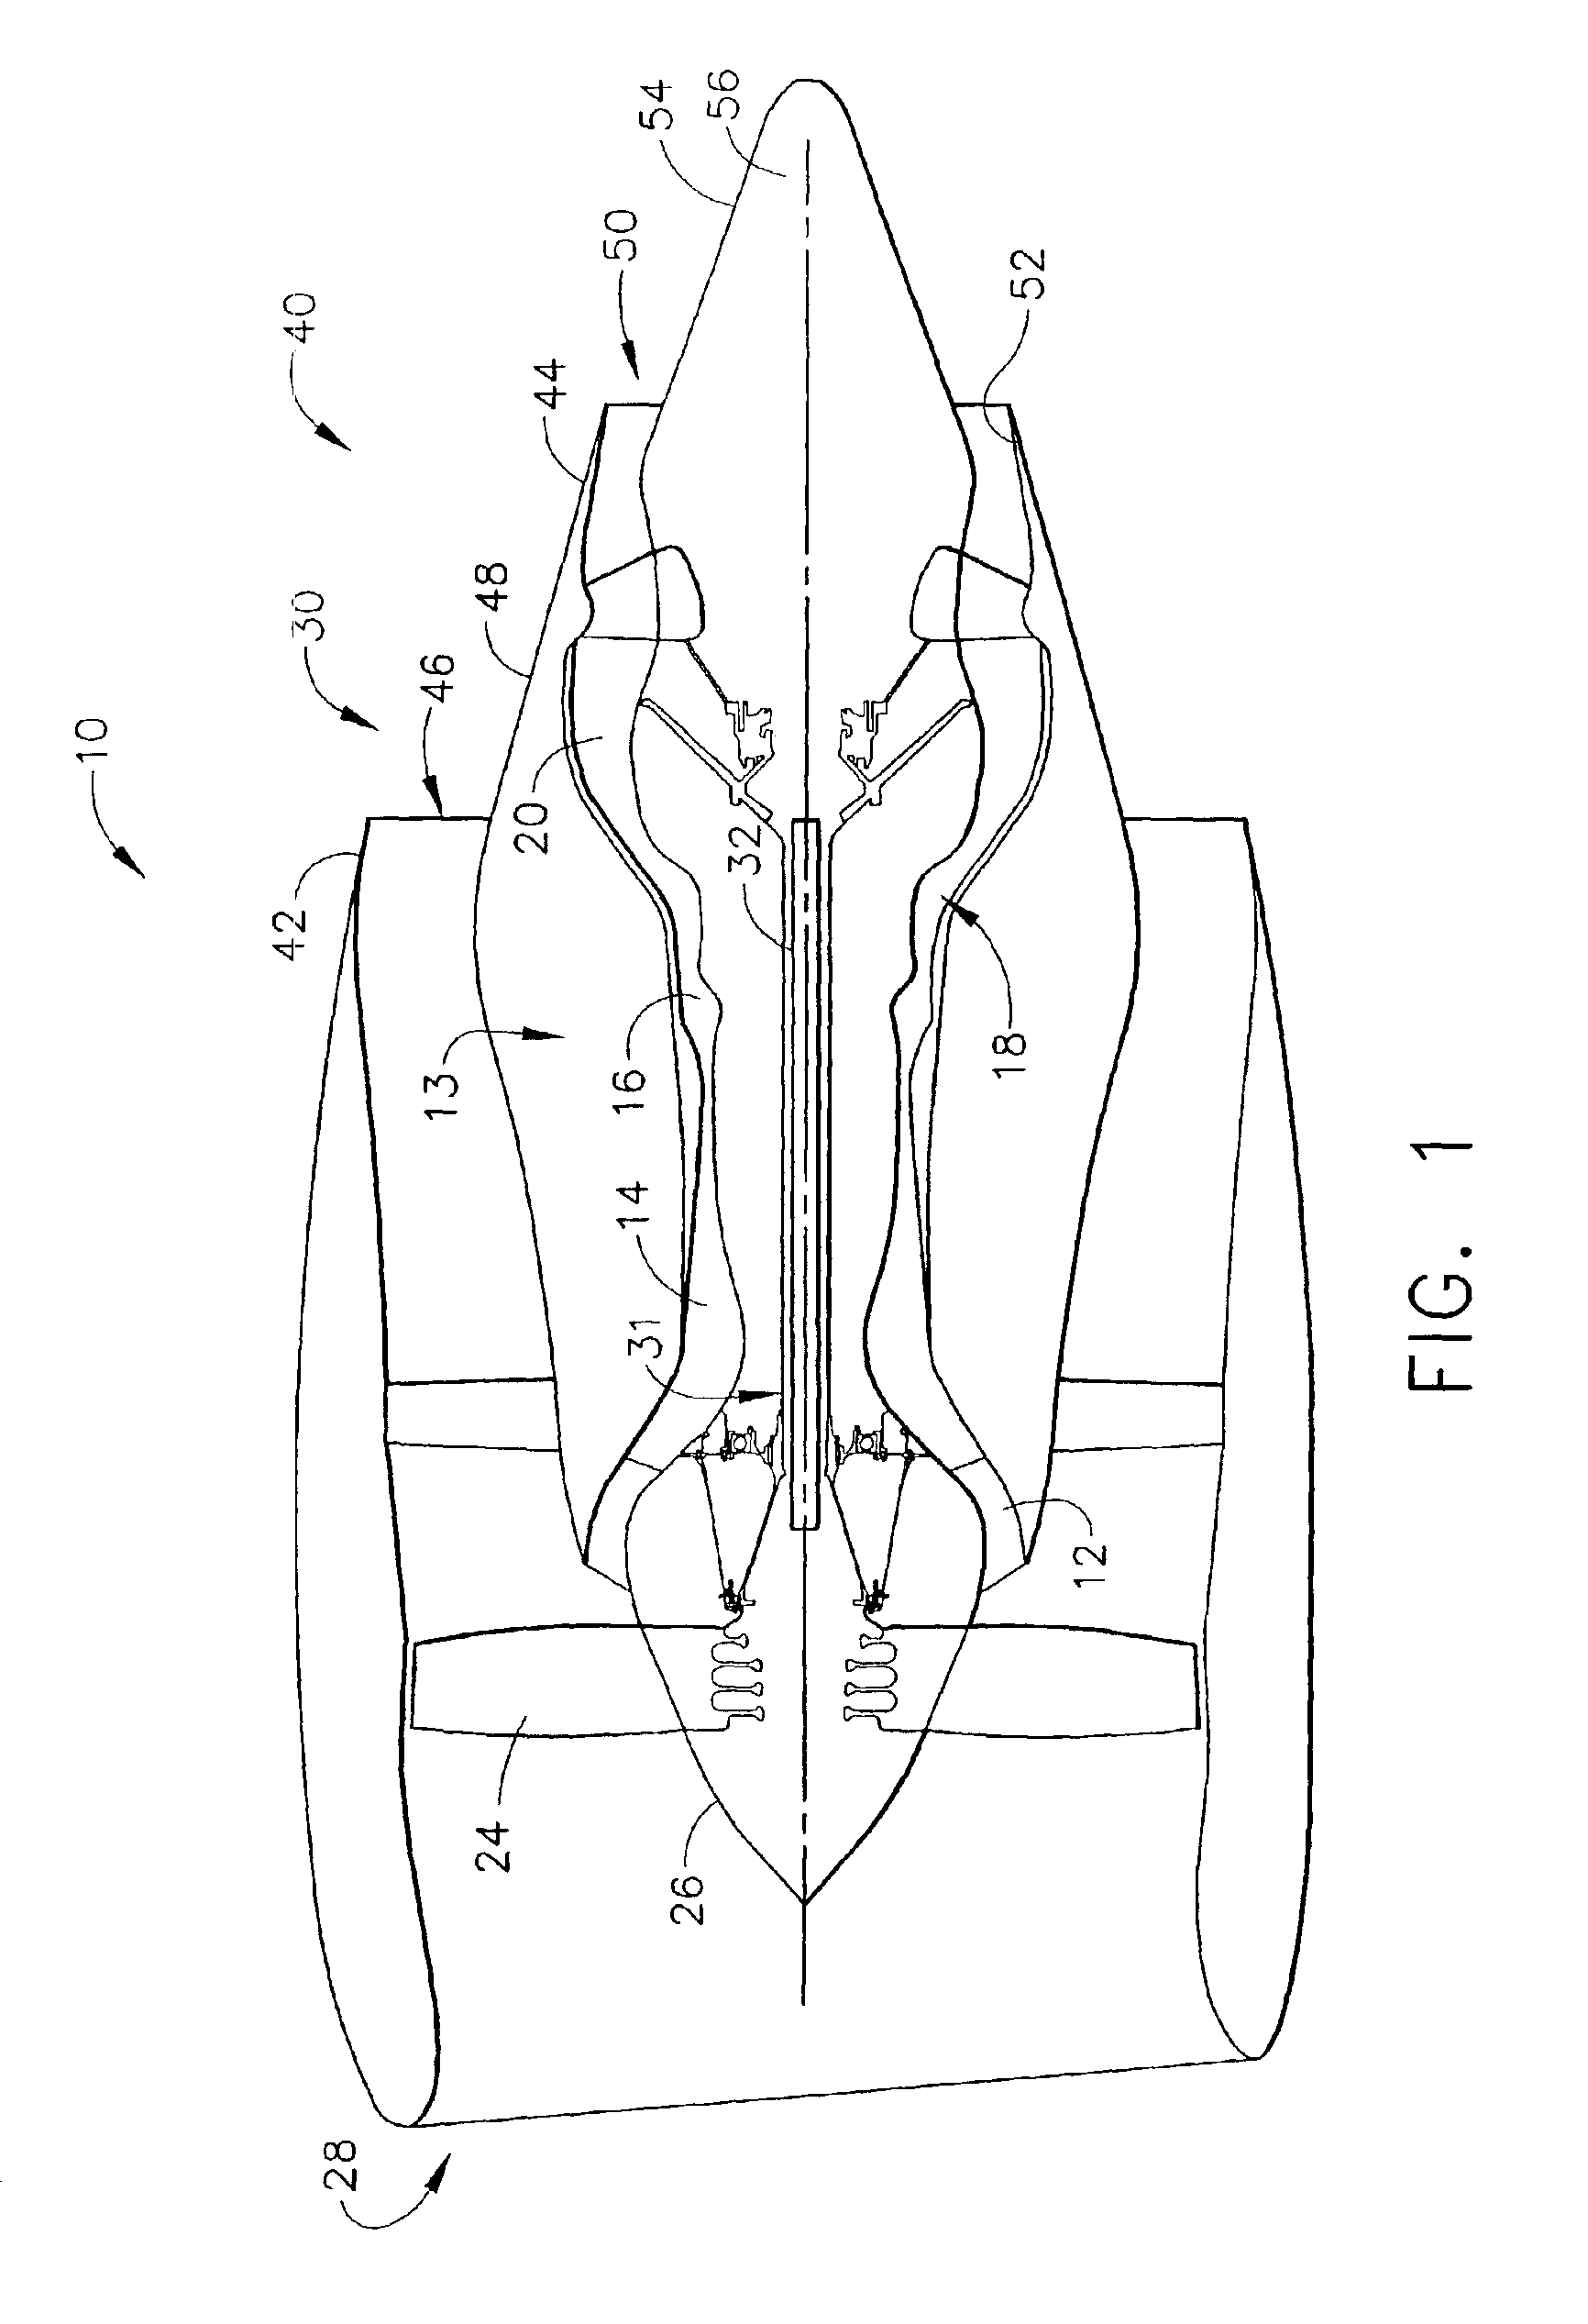 Method and apparatus for noise attenuation for gas turbine engines using at least one synthetic jet actuator for injecting air